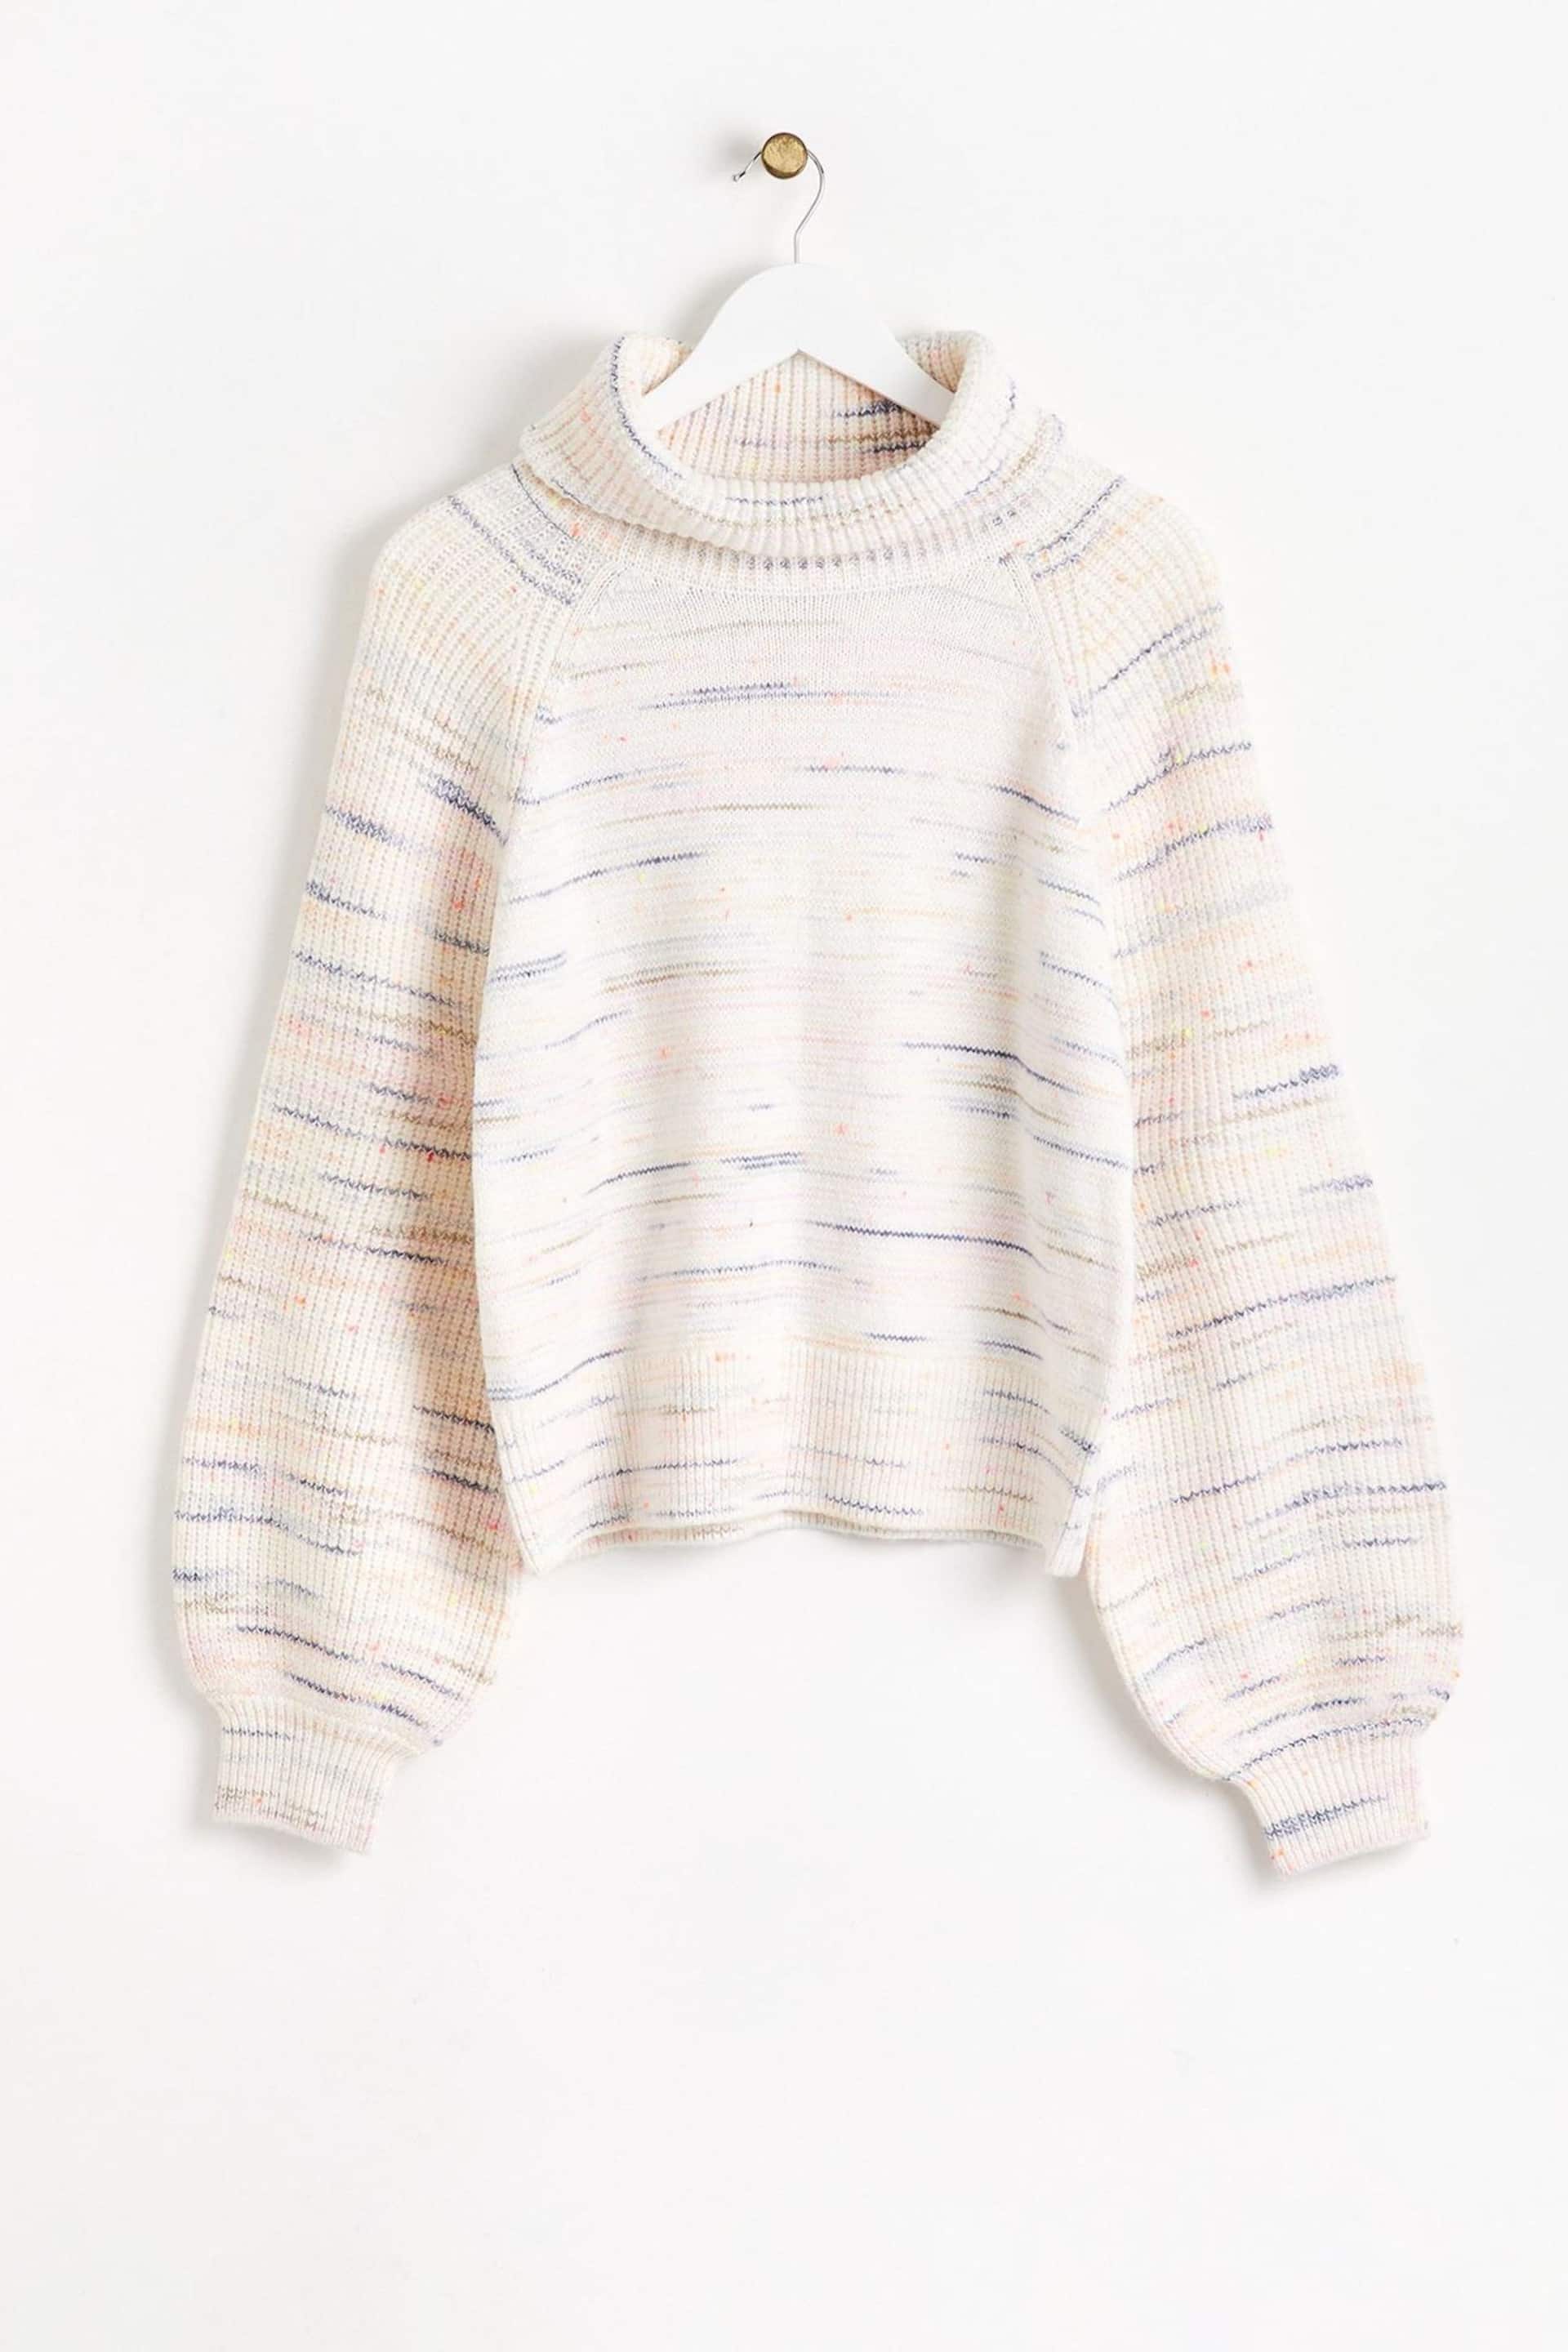 Oliver Bonas Nepped Roll Neck Knitted Cream Jumper - Image 4 of 8